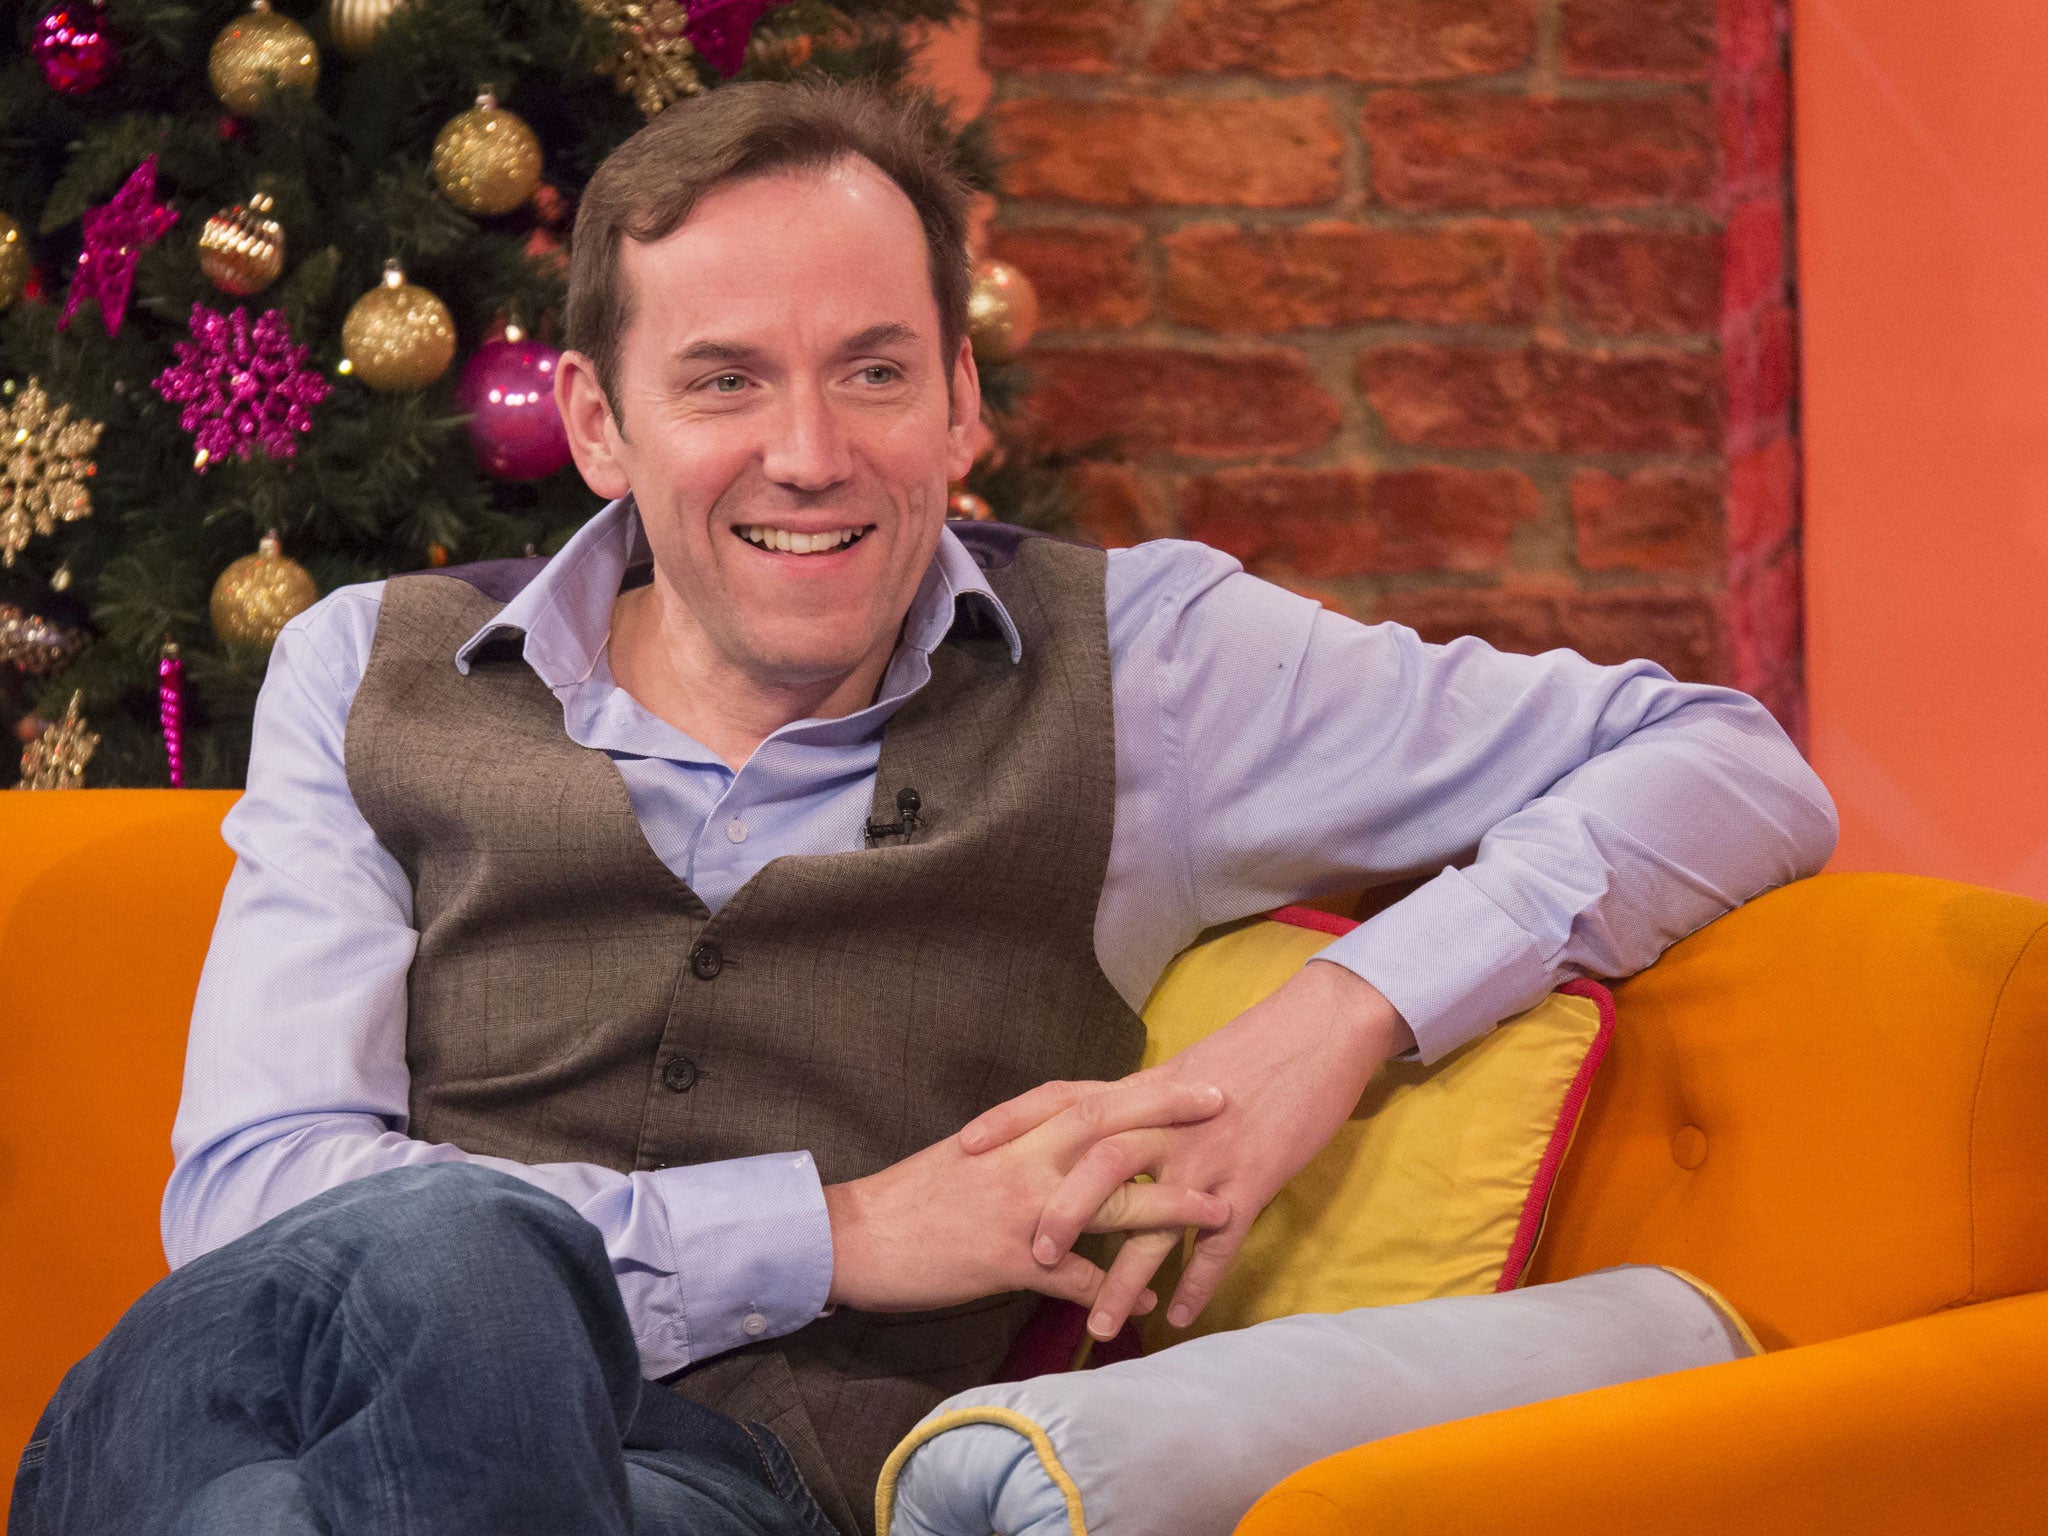 Ben Miller will appear alongside new Doctor Peter Capaldi in the eighth series of the BBC sci-fi drama